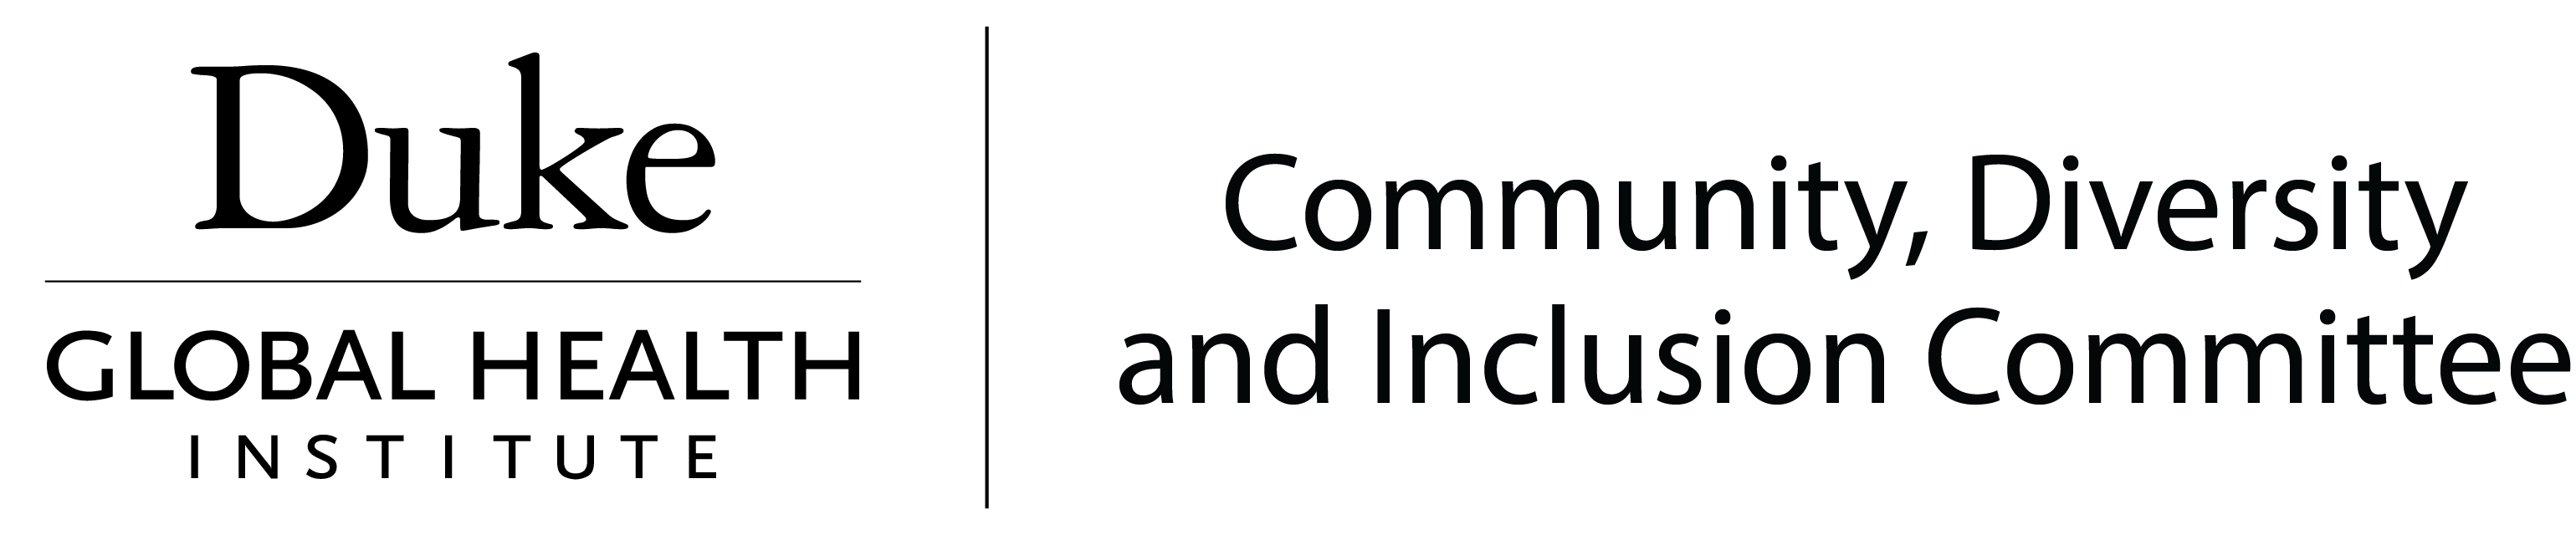 Community, Diversity and Inclusion Committee